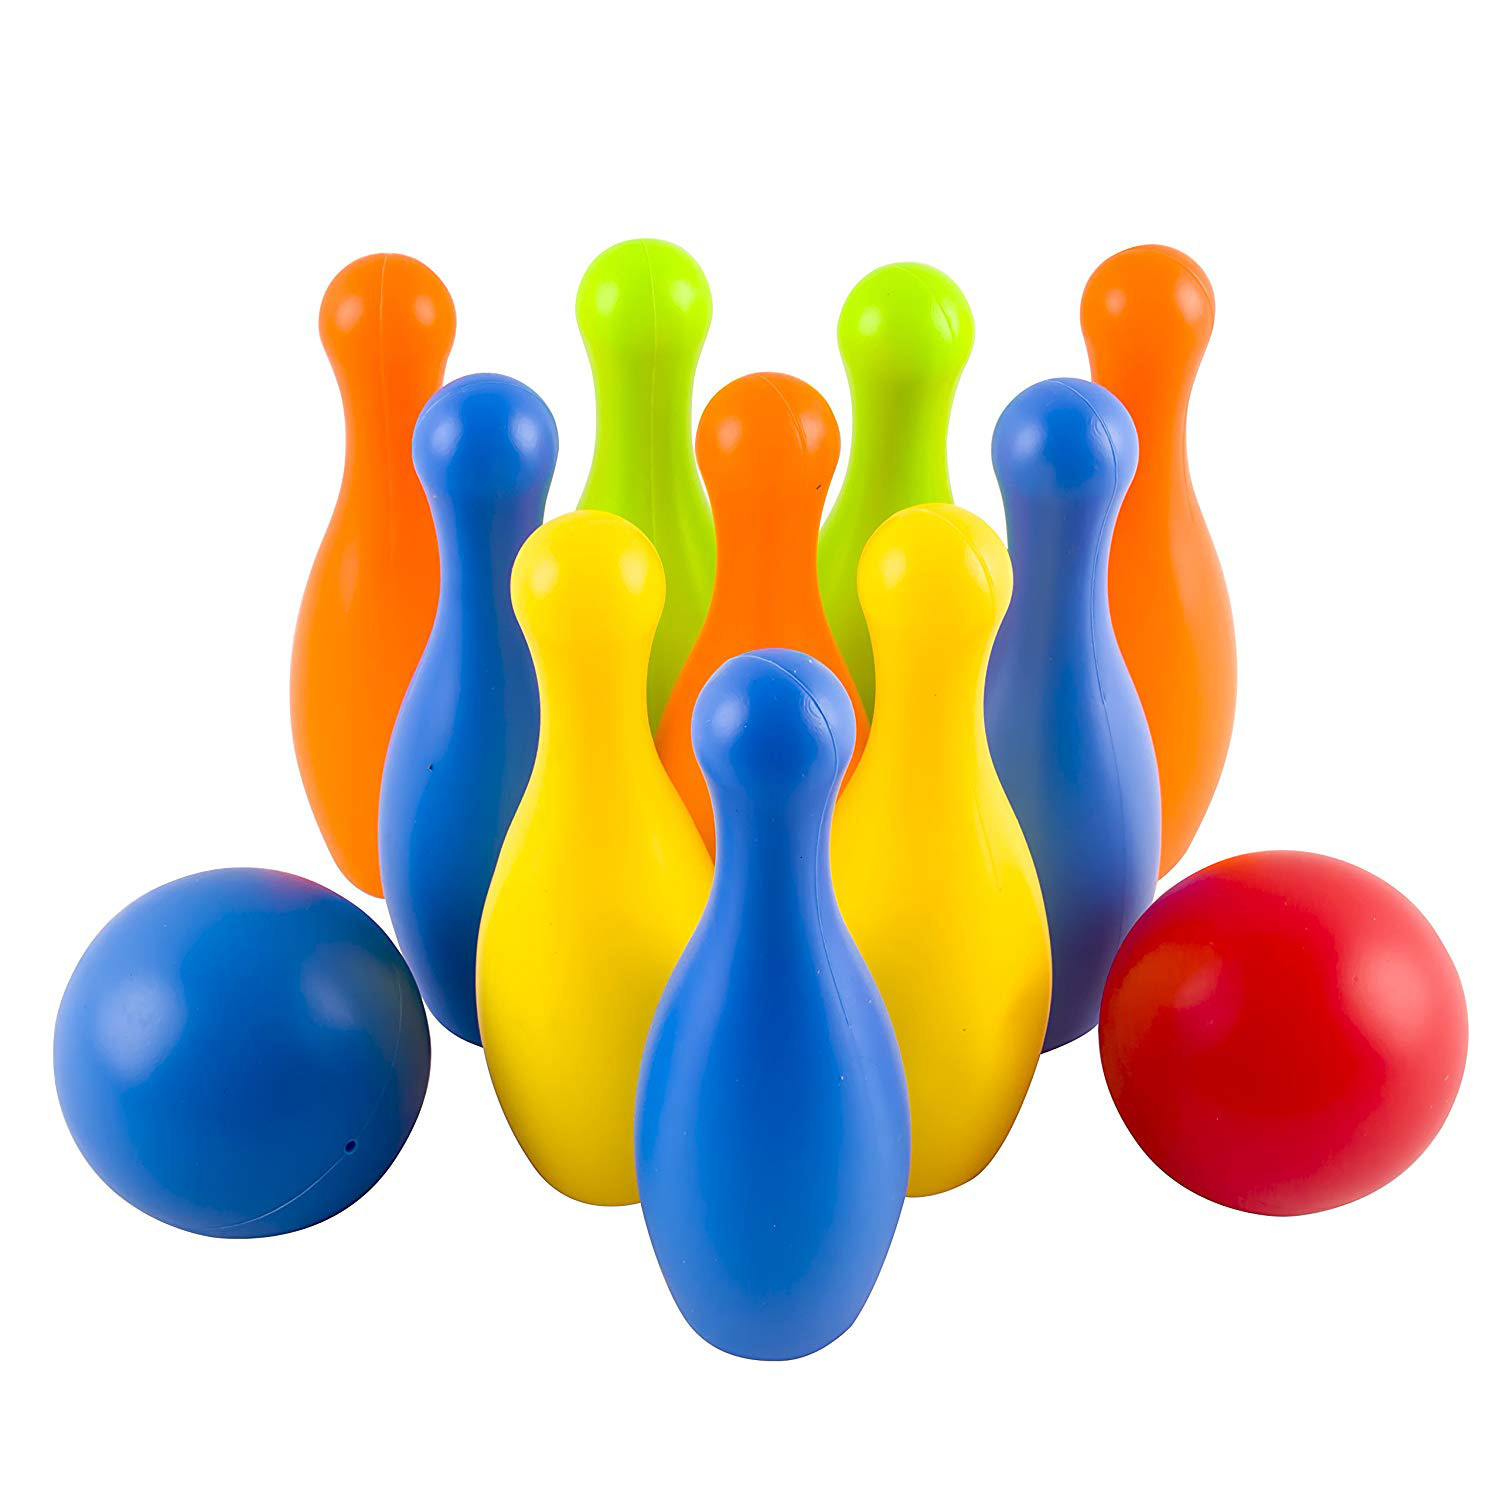 Toy Bowling Play Set Deluxe for Children Colorful 12 Piece 10 Pins 2 Balls Carrying Case Children's Educational Early Development Sport Safe Game for Ages 2 3 4 5 Year Old Toddlers Unisex boy or girl